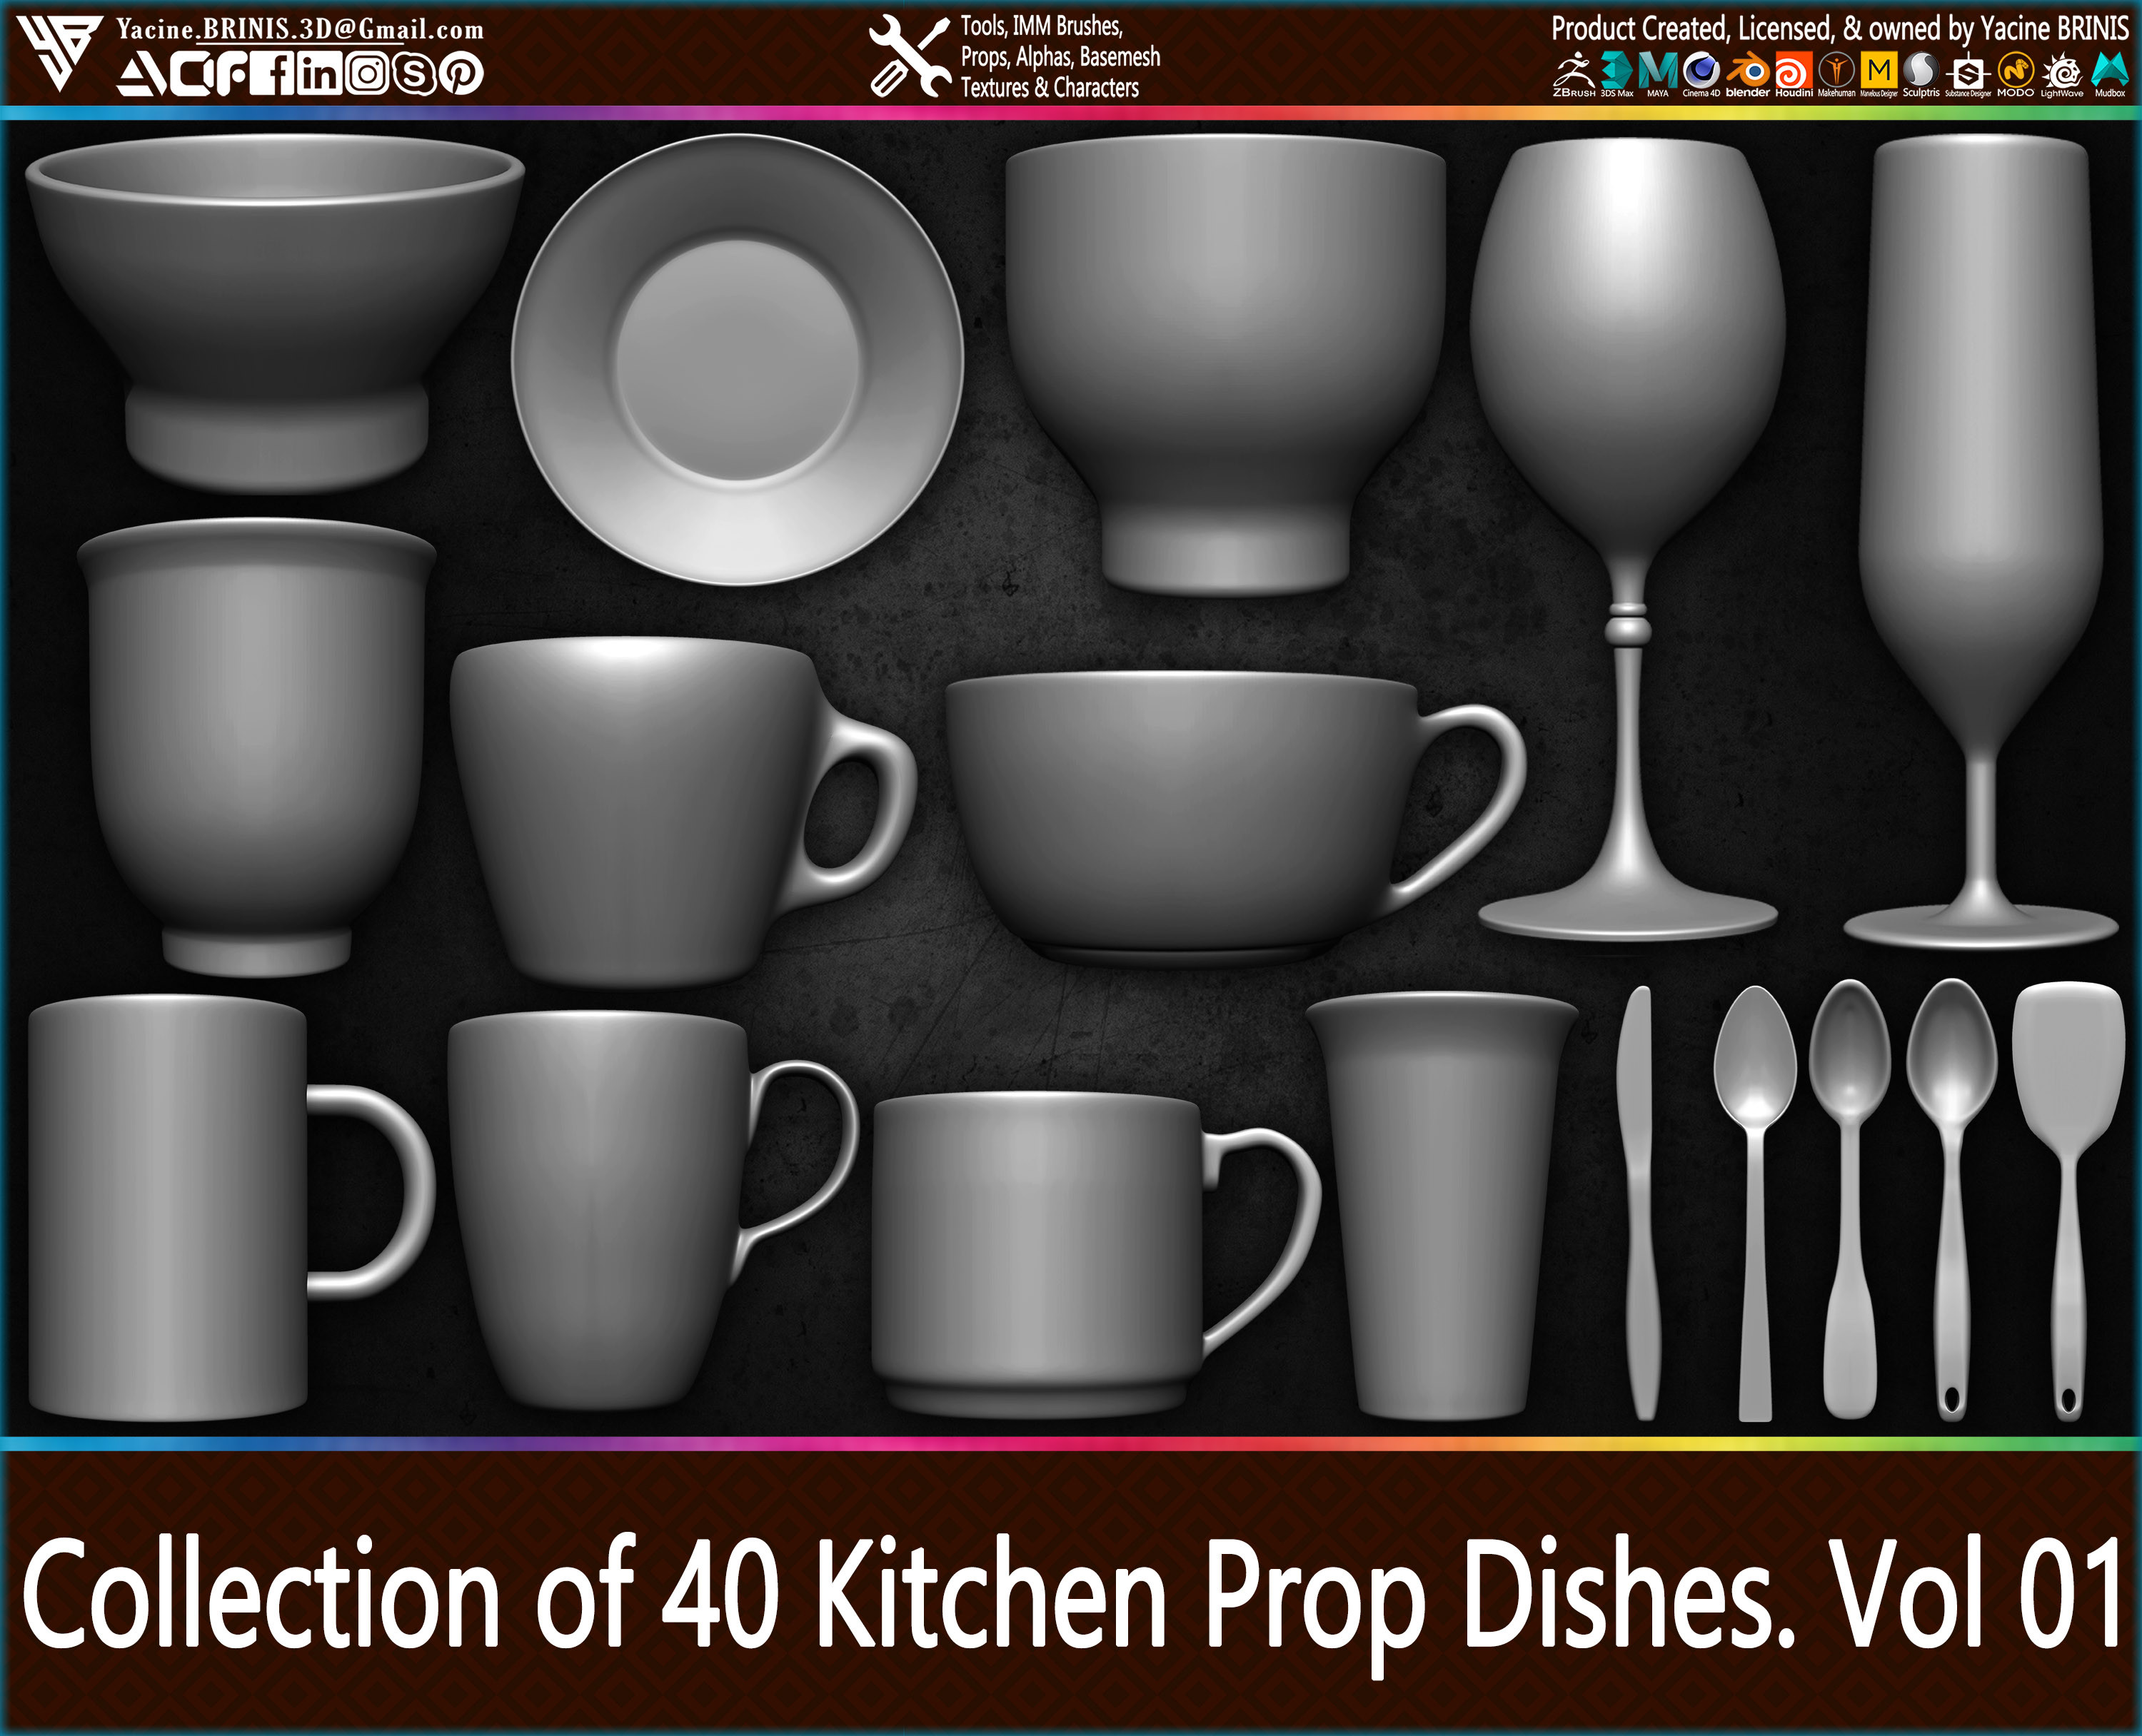 Collection of 40 Kitchen props Dishes By Yacine BRINIS Vol 01 Set 005